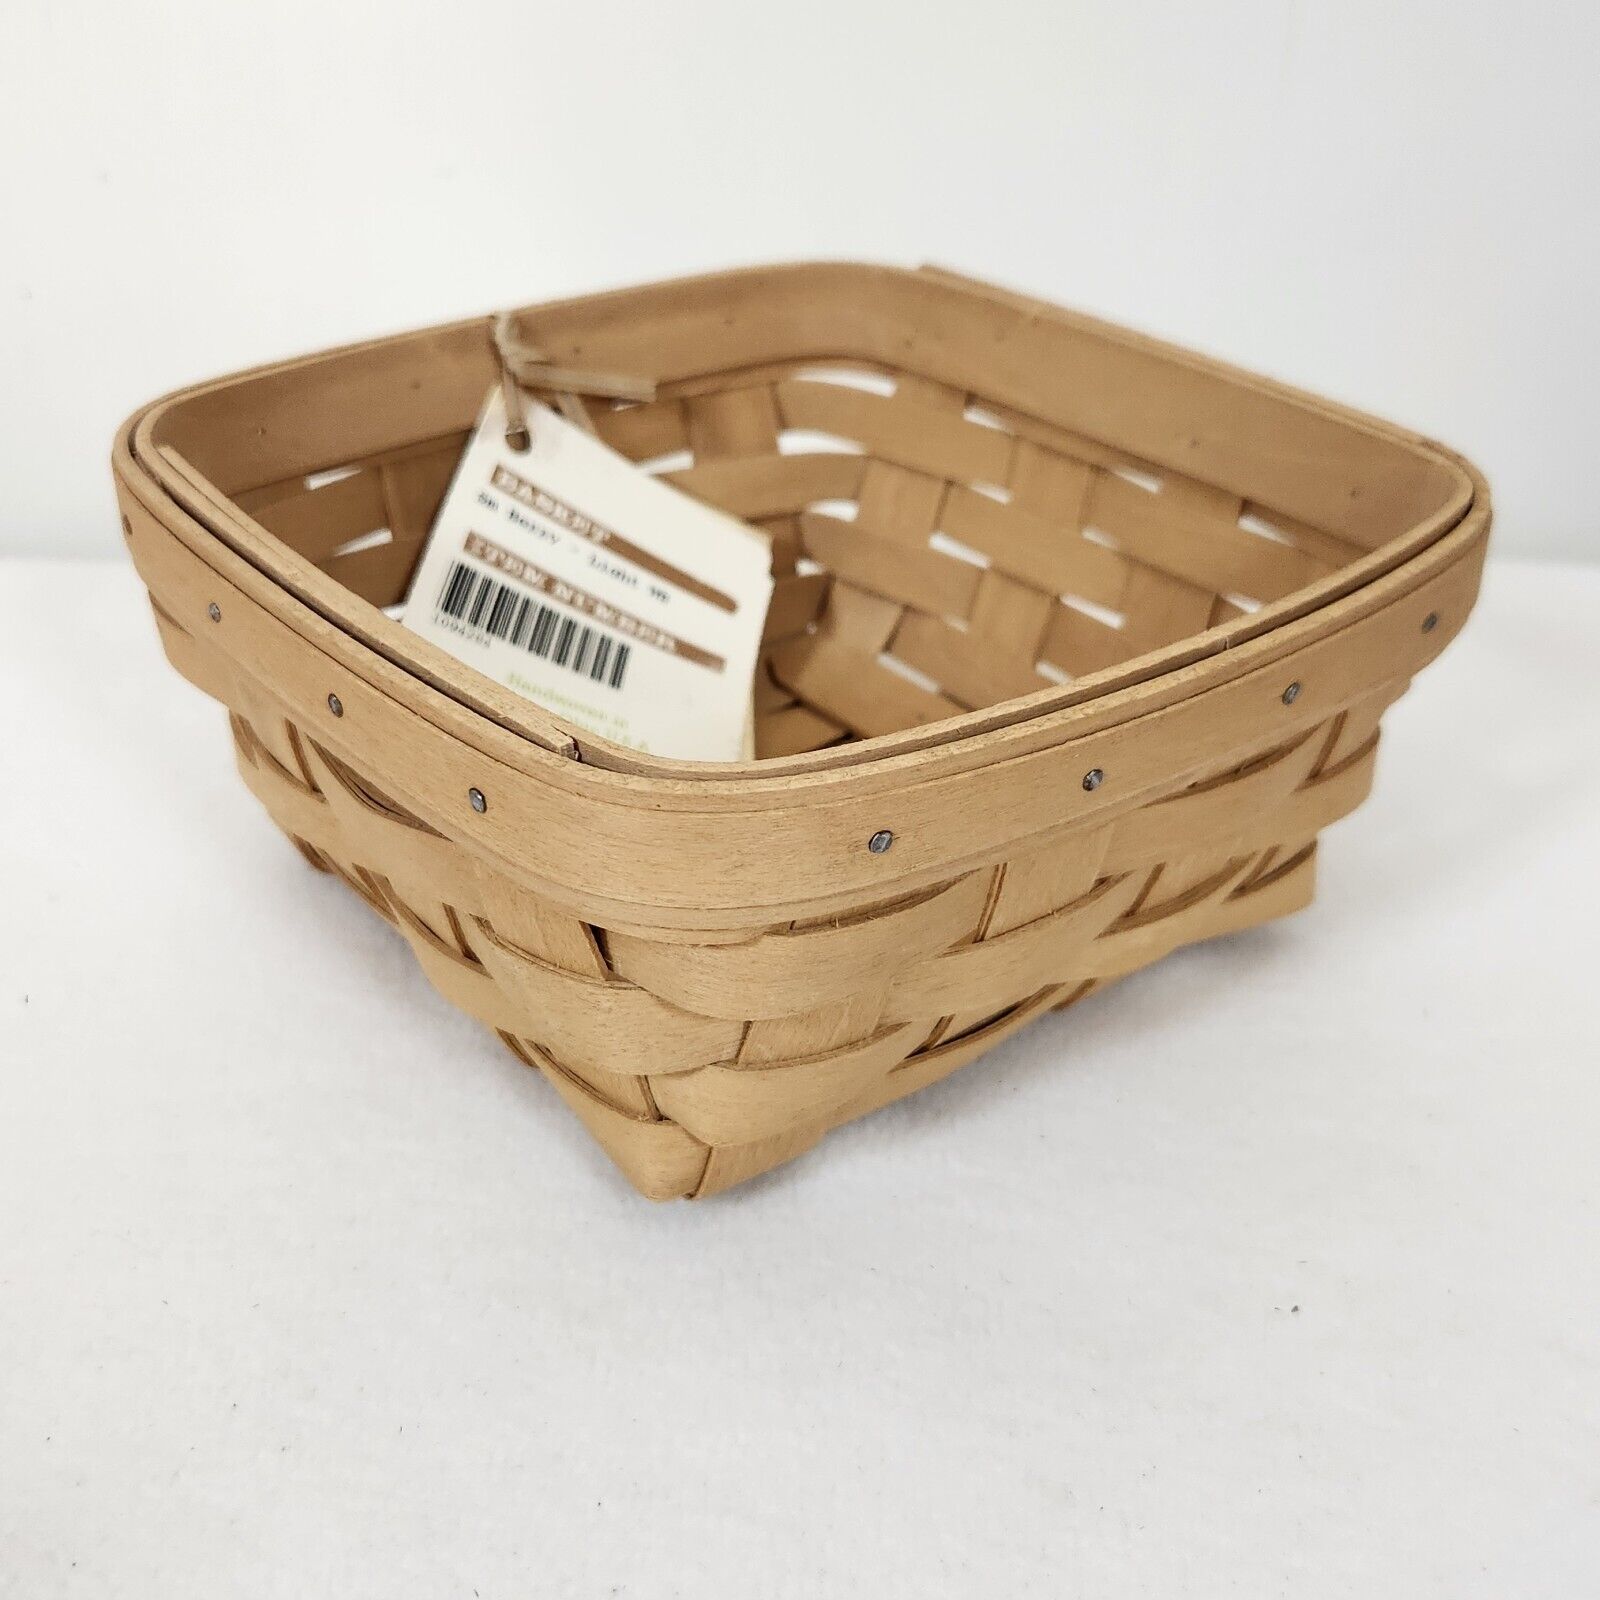 New Longaberger 2011 Small Berry Basket Light Warm Brown Basket+Product Cards